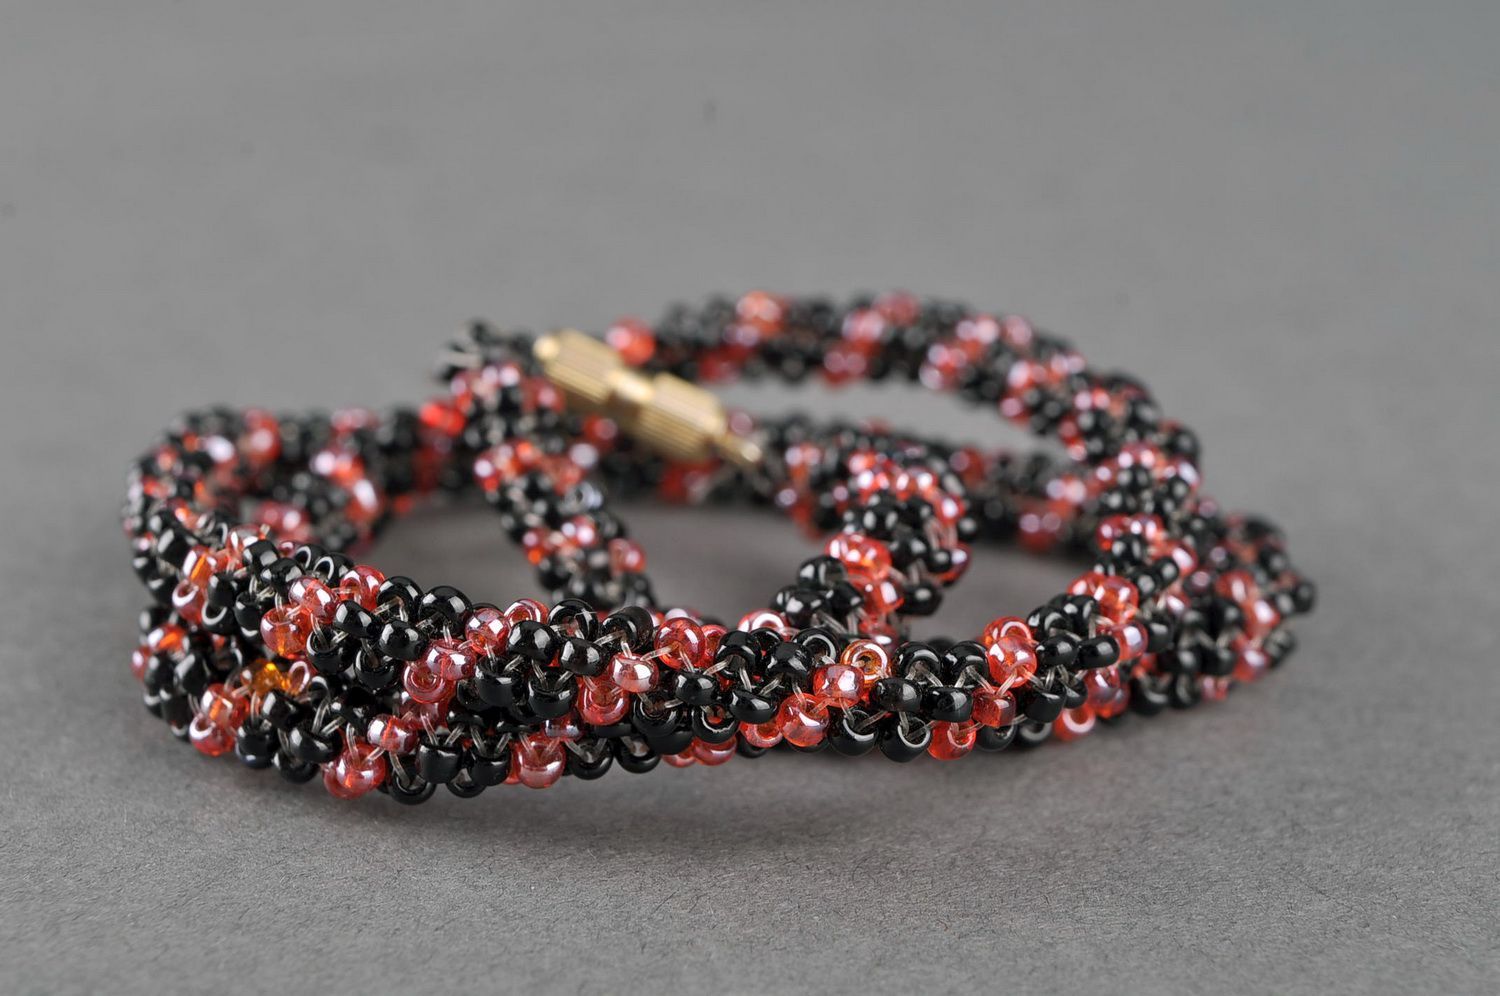 Bracelet-necklace made of chinese beads photo 1